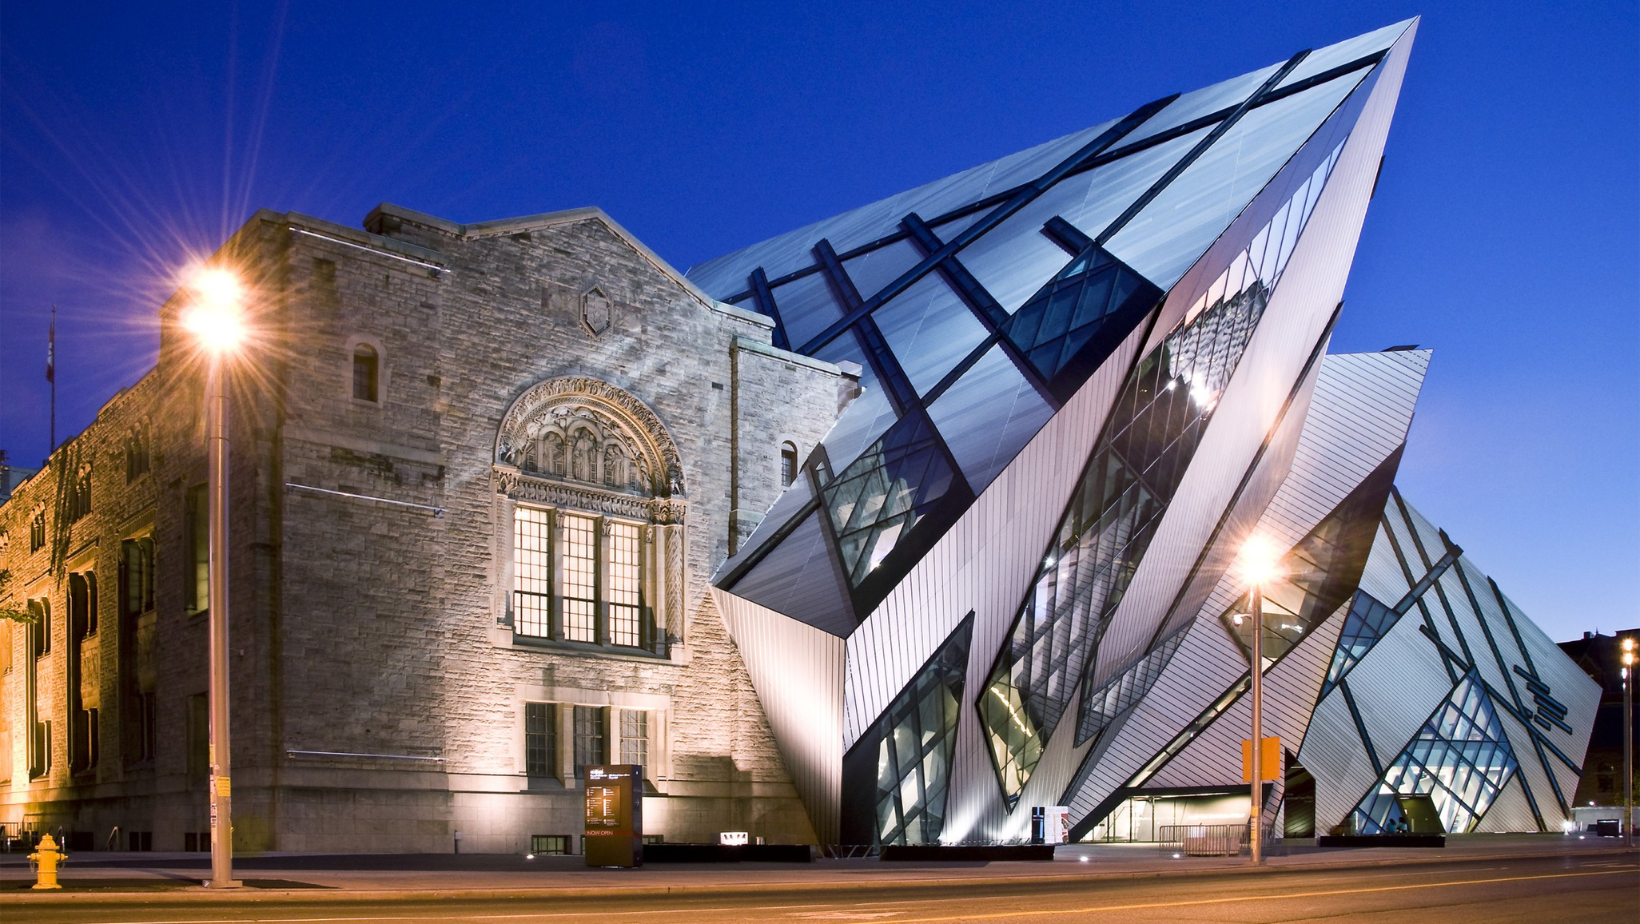 A evening picture of the front of the Royal Ontario Museum, showing the Michael Lee-Chin Crystal.